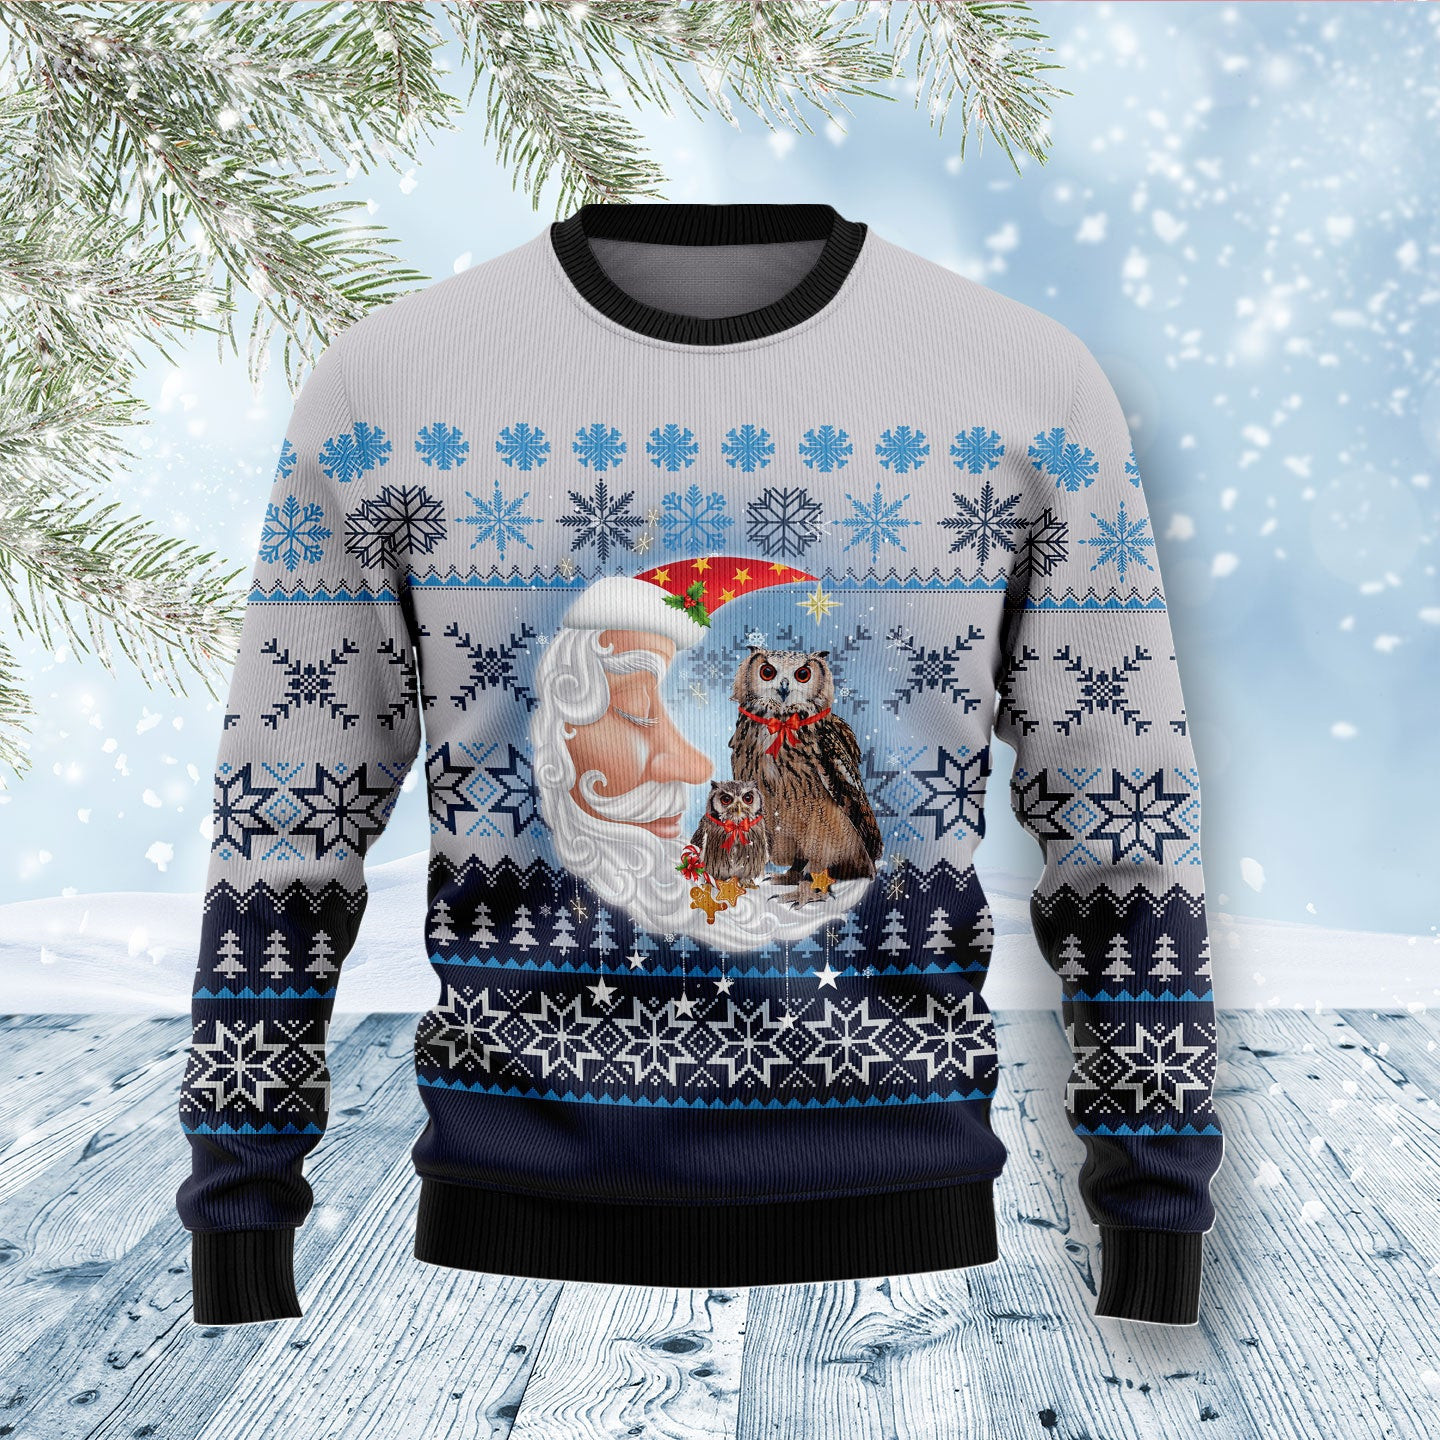 Owl Love Santa Moon Ugly Christmas Sweater, Ugly Sweater For Men Women, Holiday Sweater